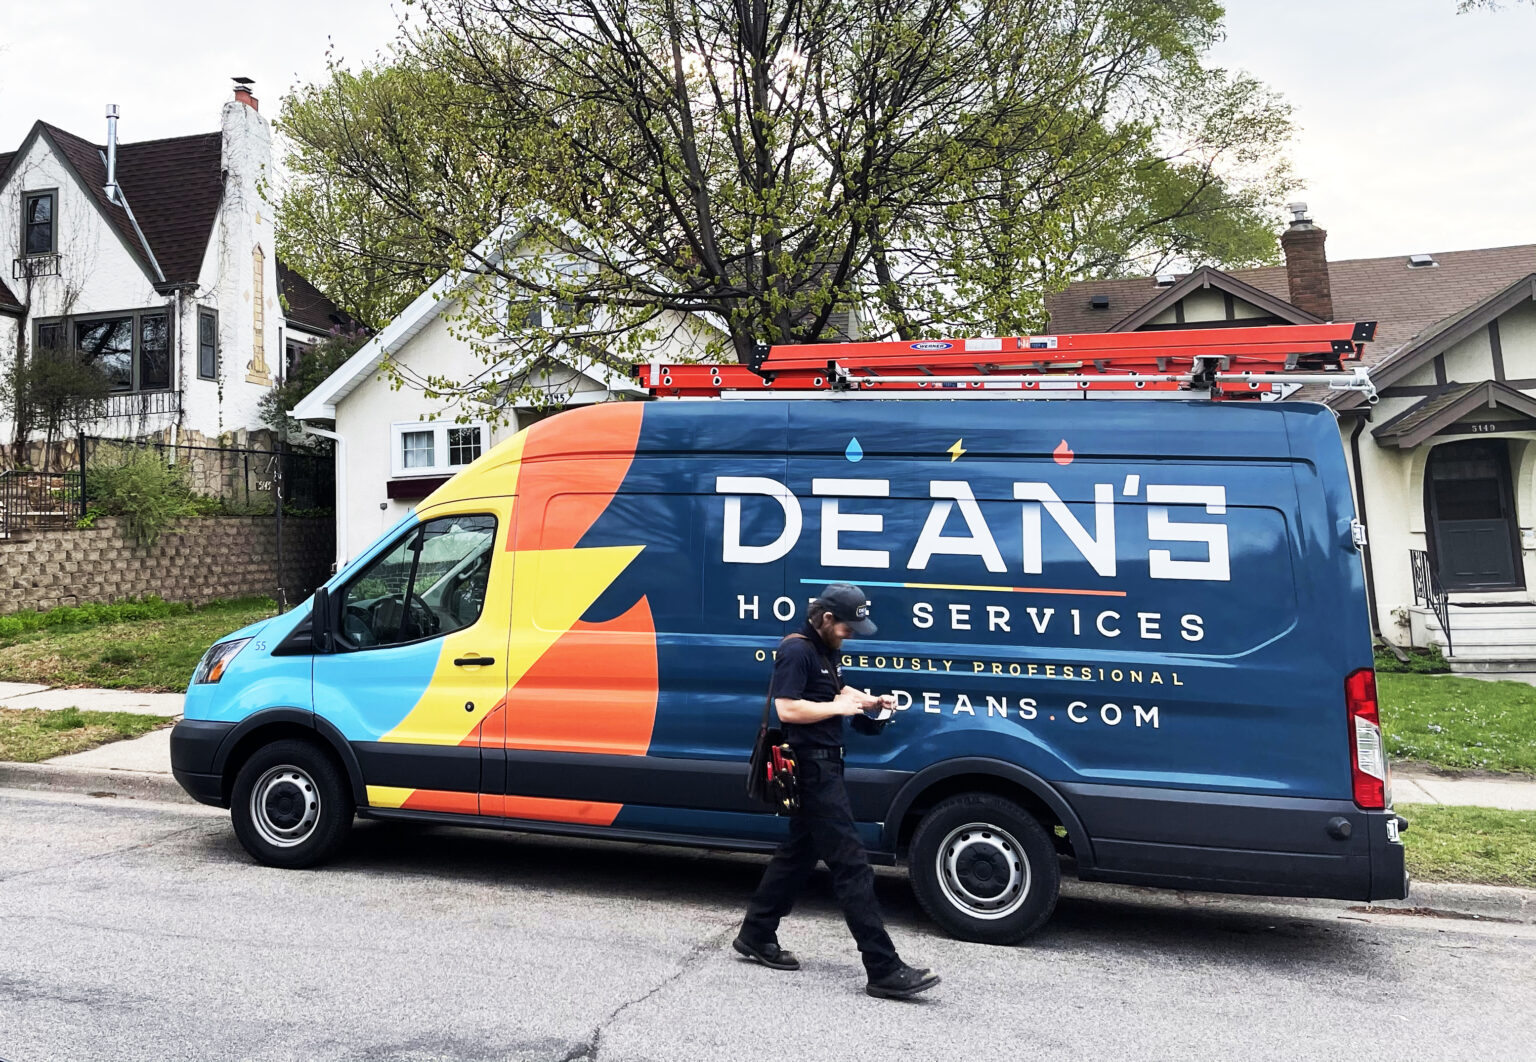 Dean's service van parked in front of a residence